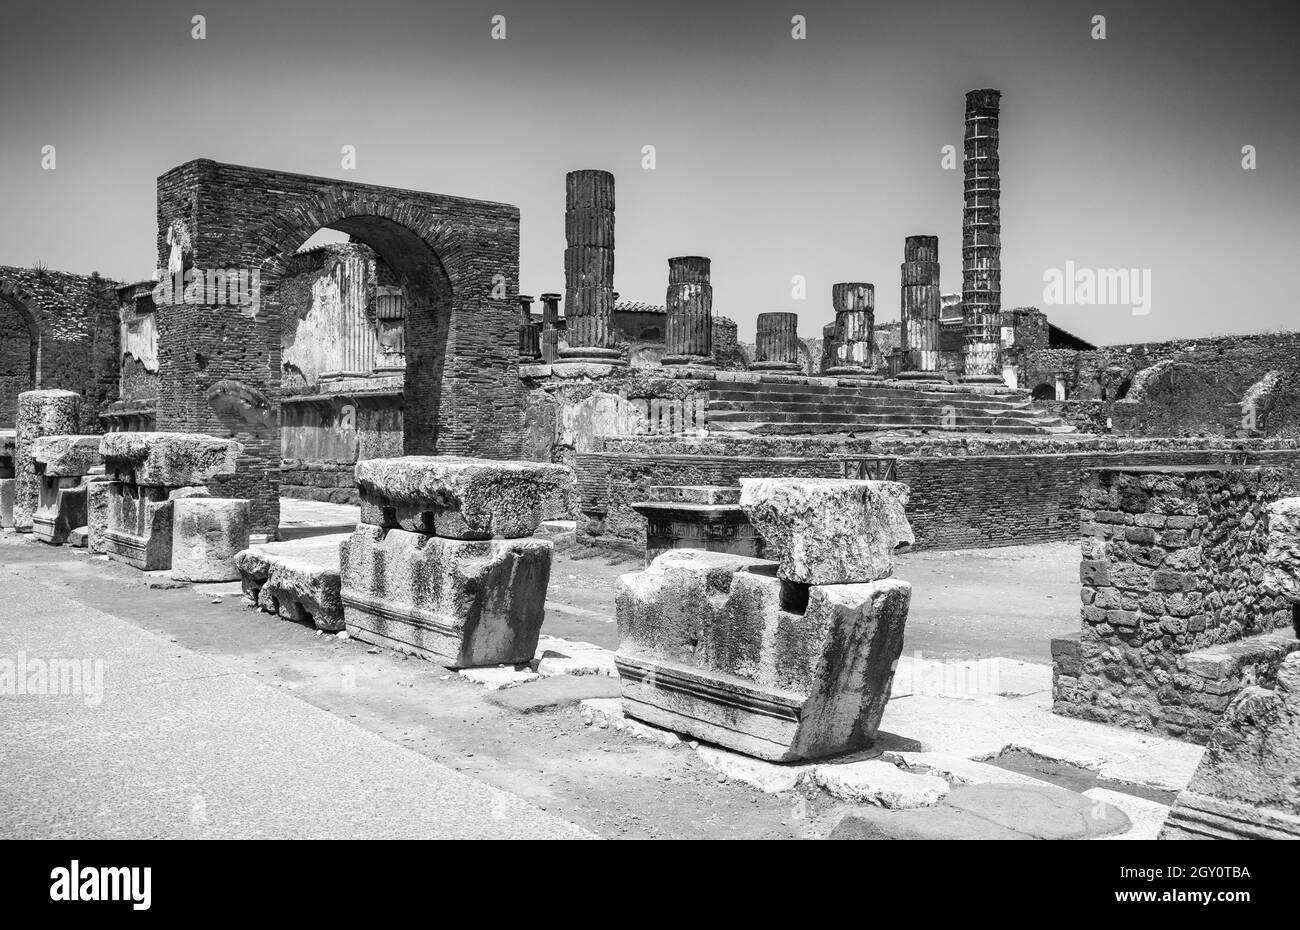 Grayscale shot of ancient Pompeii city ruins in Italy destroyed by the eruption of Mount Vesuvius Stock Photo